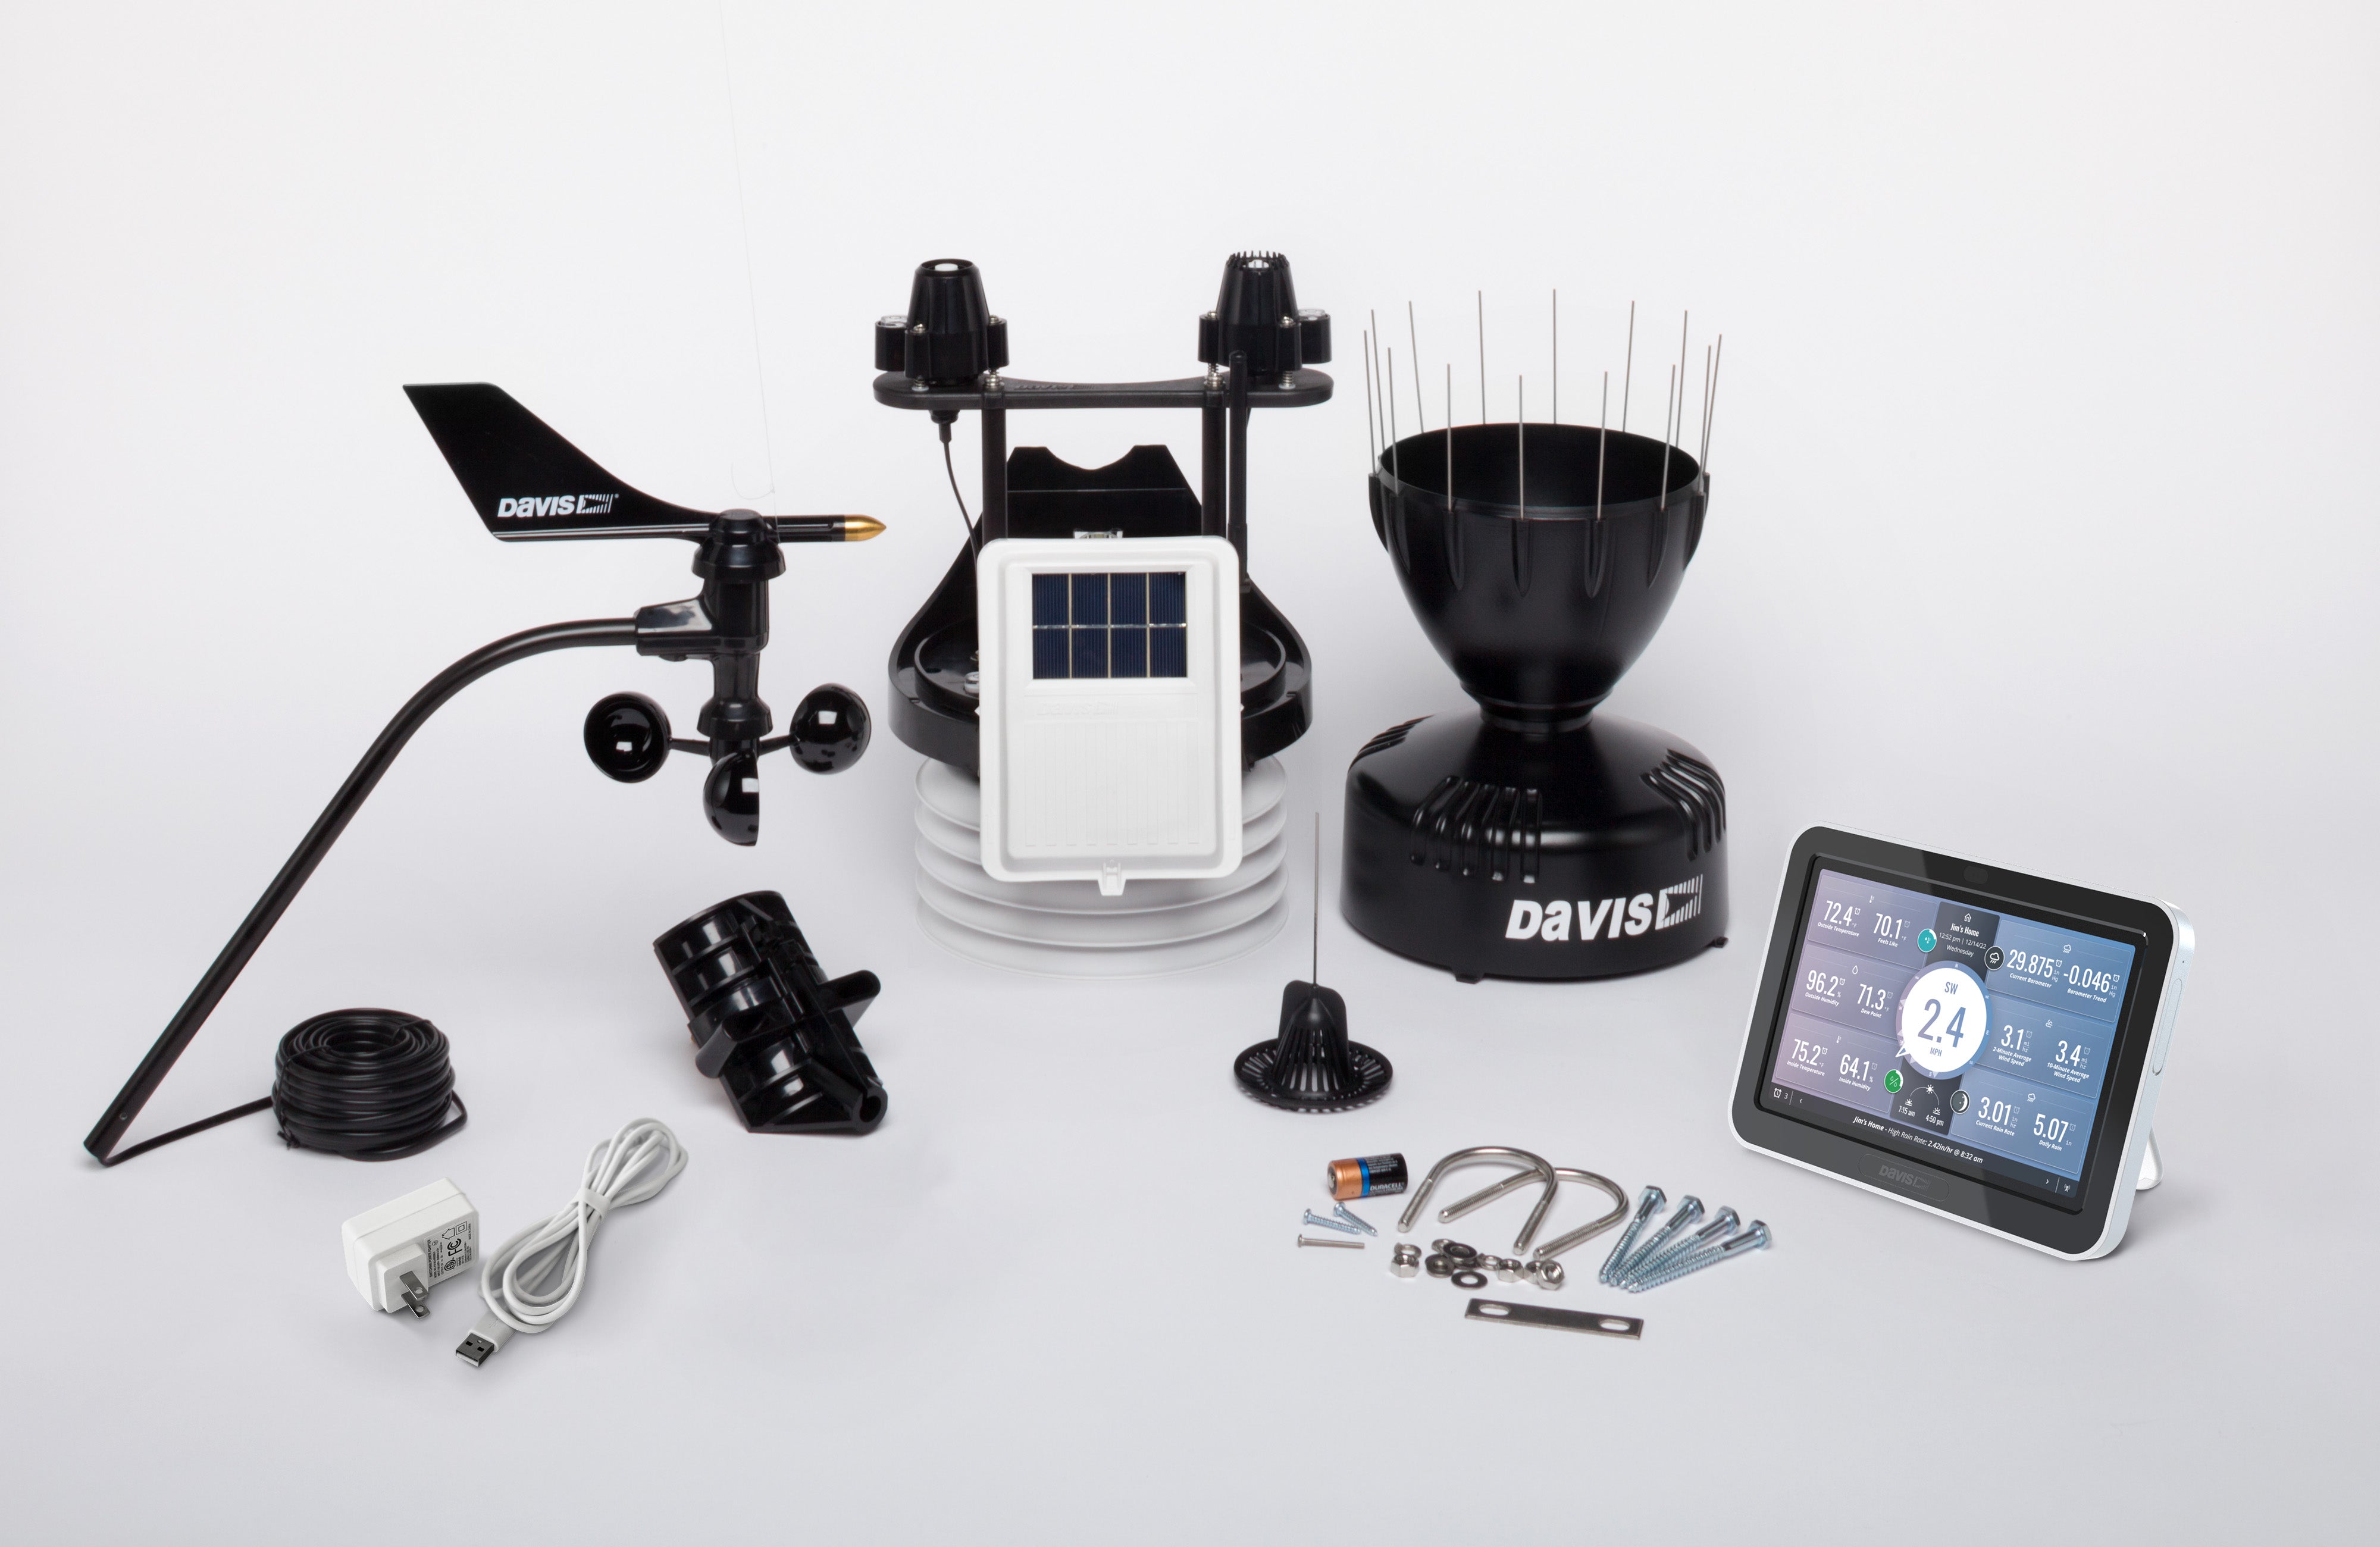 wireless professional weather station components